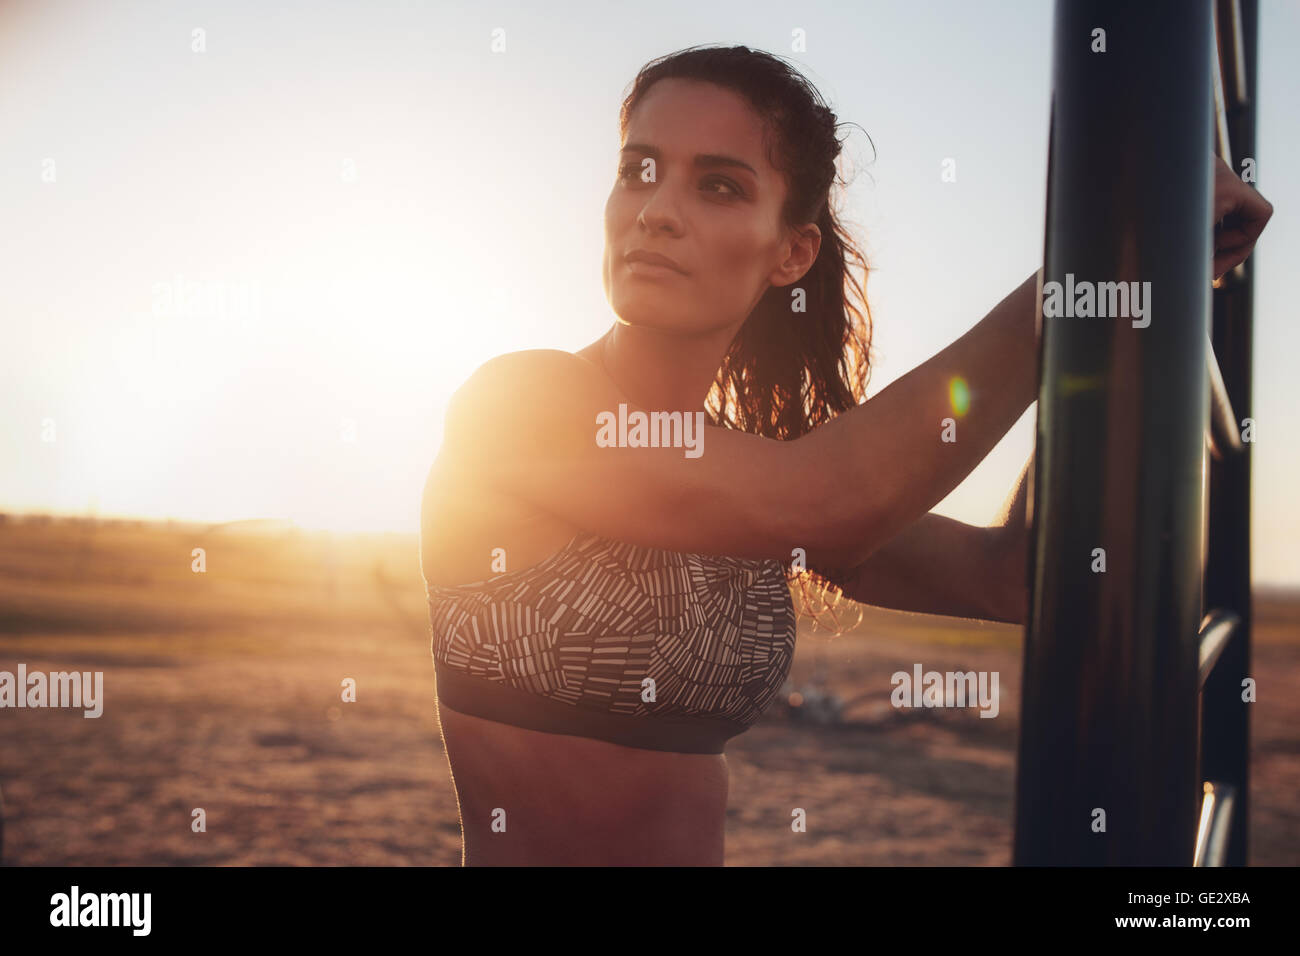 Portrait of fitness woman standing outdoors and looking away. Middle eastern female model in sportswear working out on wall bars Stock Photo